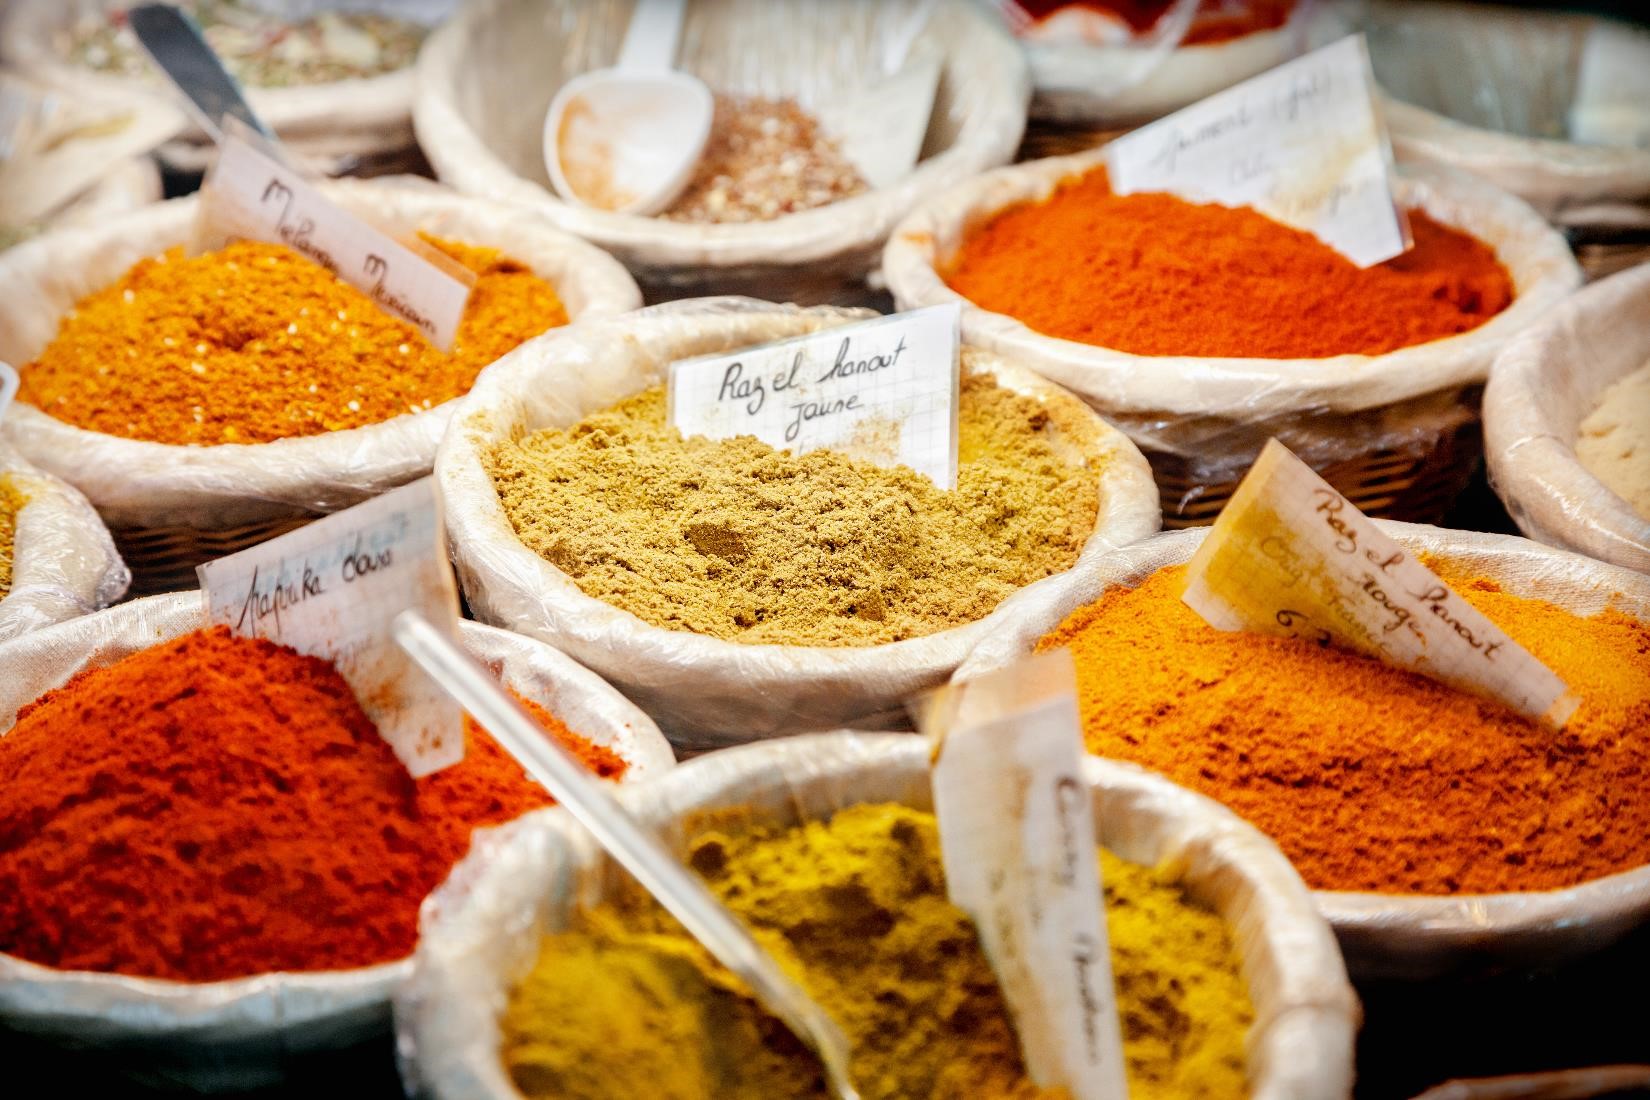 FIND OUT MORE ABOUT RAS EL HANOUT